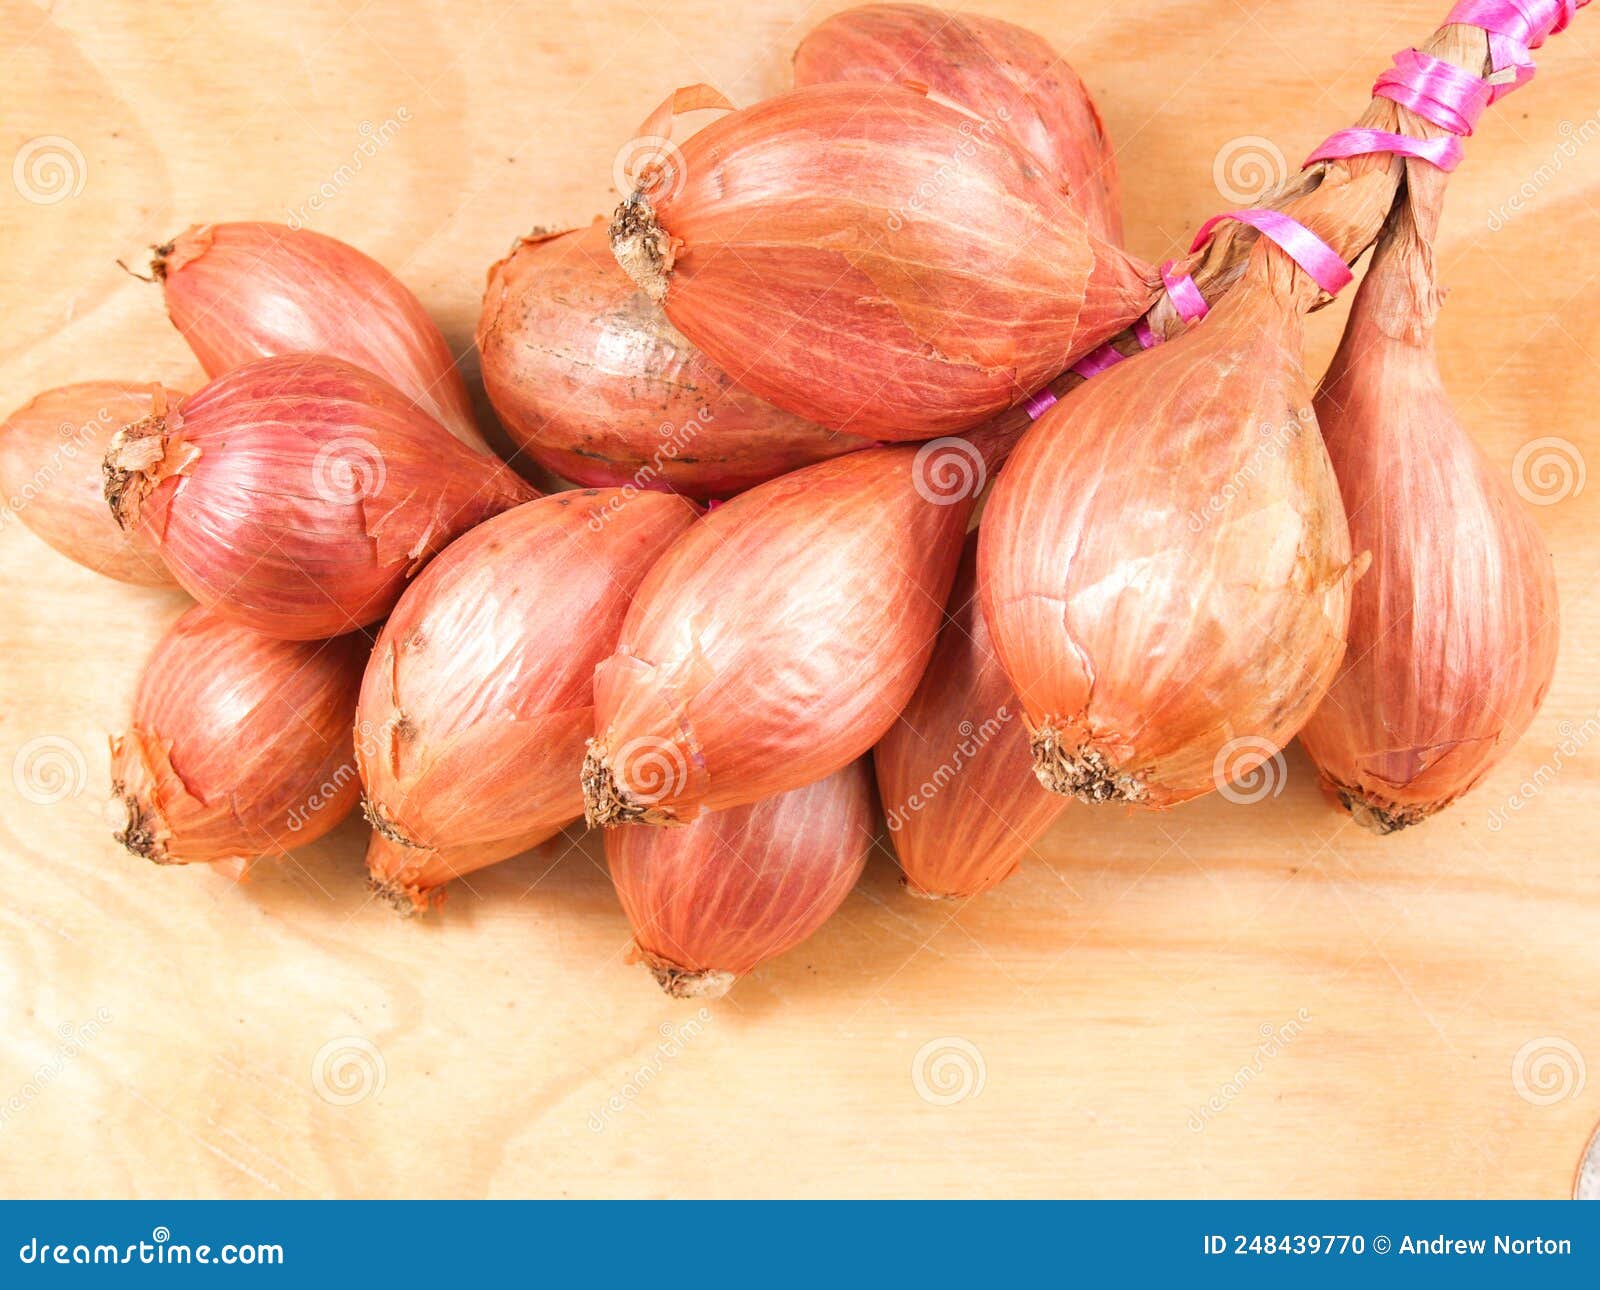 2,840 Banana Shallot Royalty-Free Images, Stock Photos & Pictures